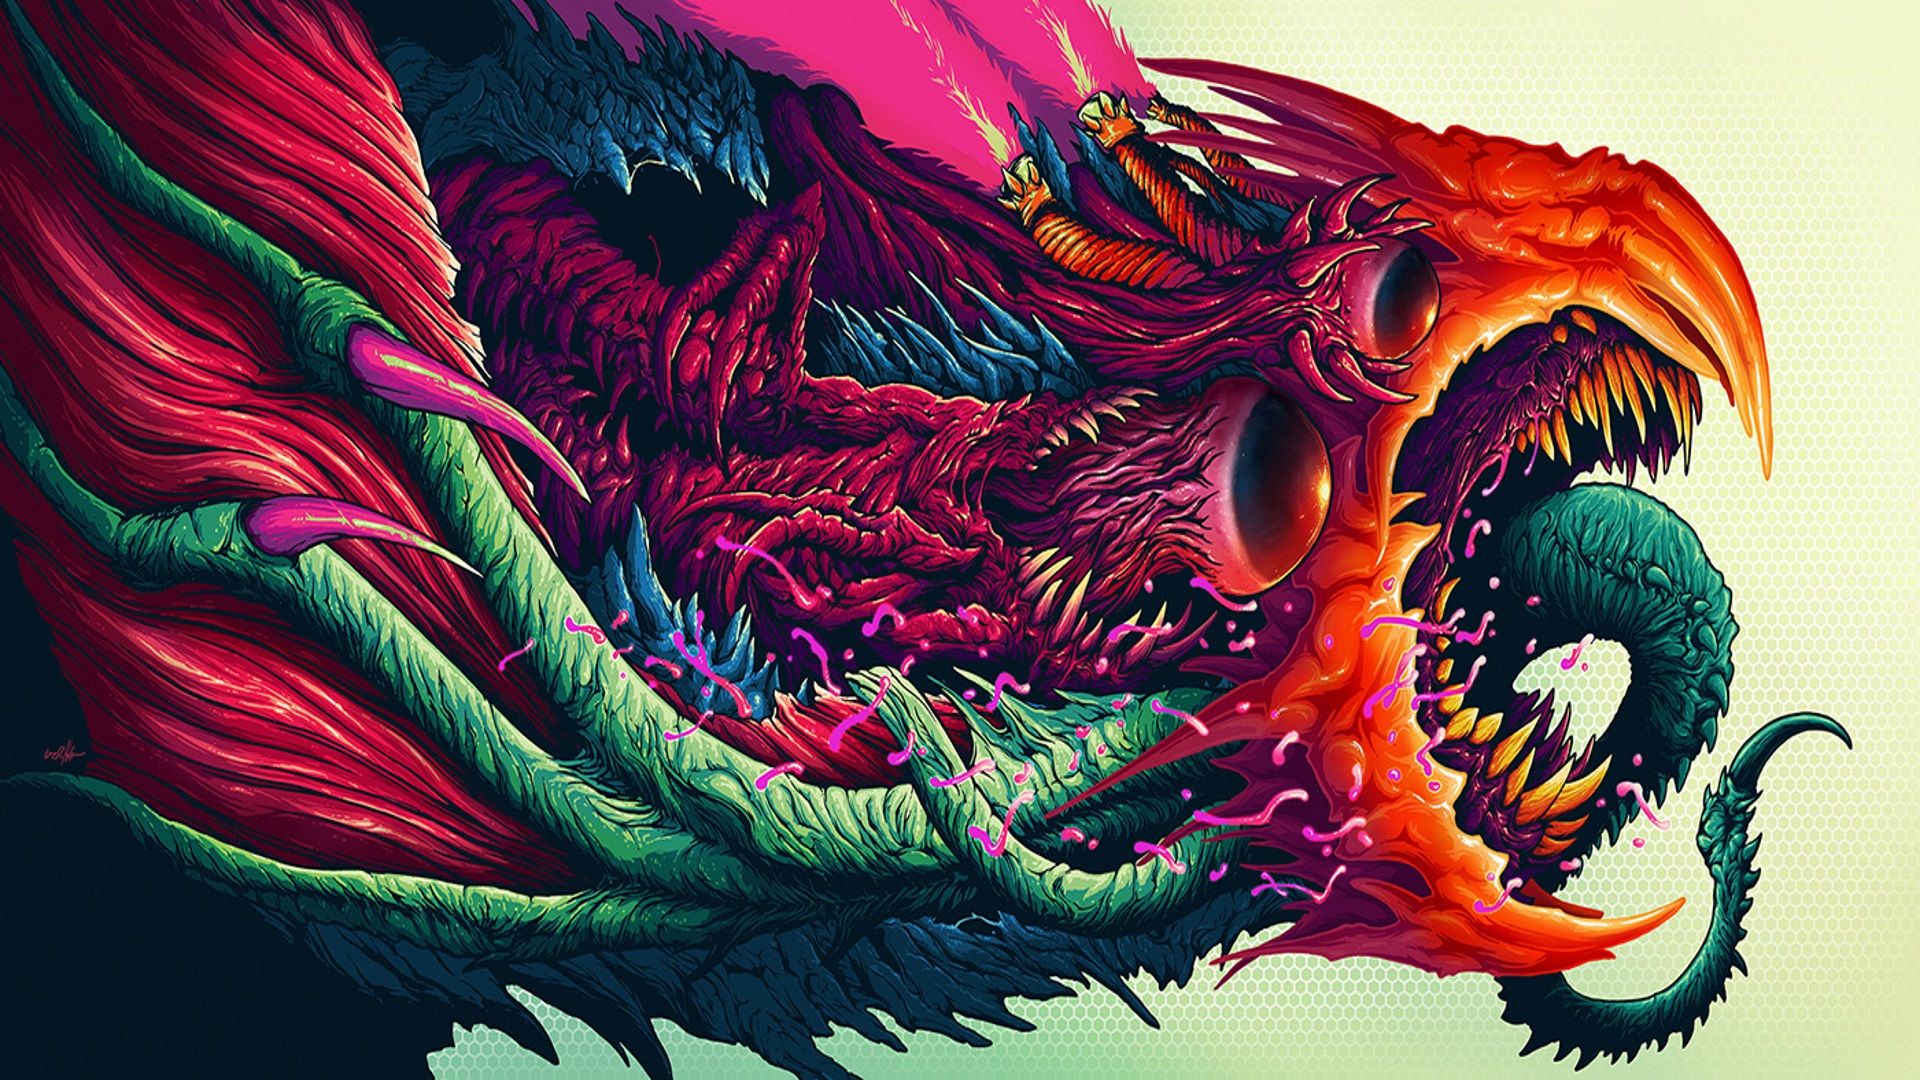 Wallpaper, psychedelic, trippy, colorful, creature 1920x1080